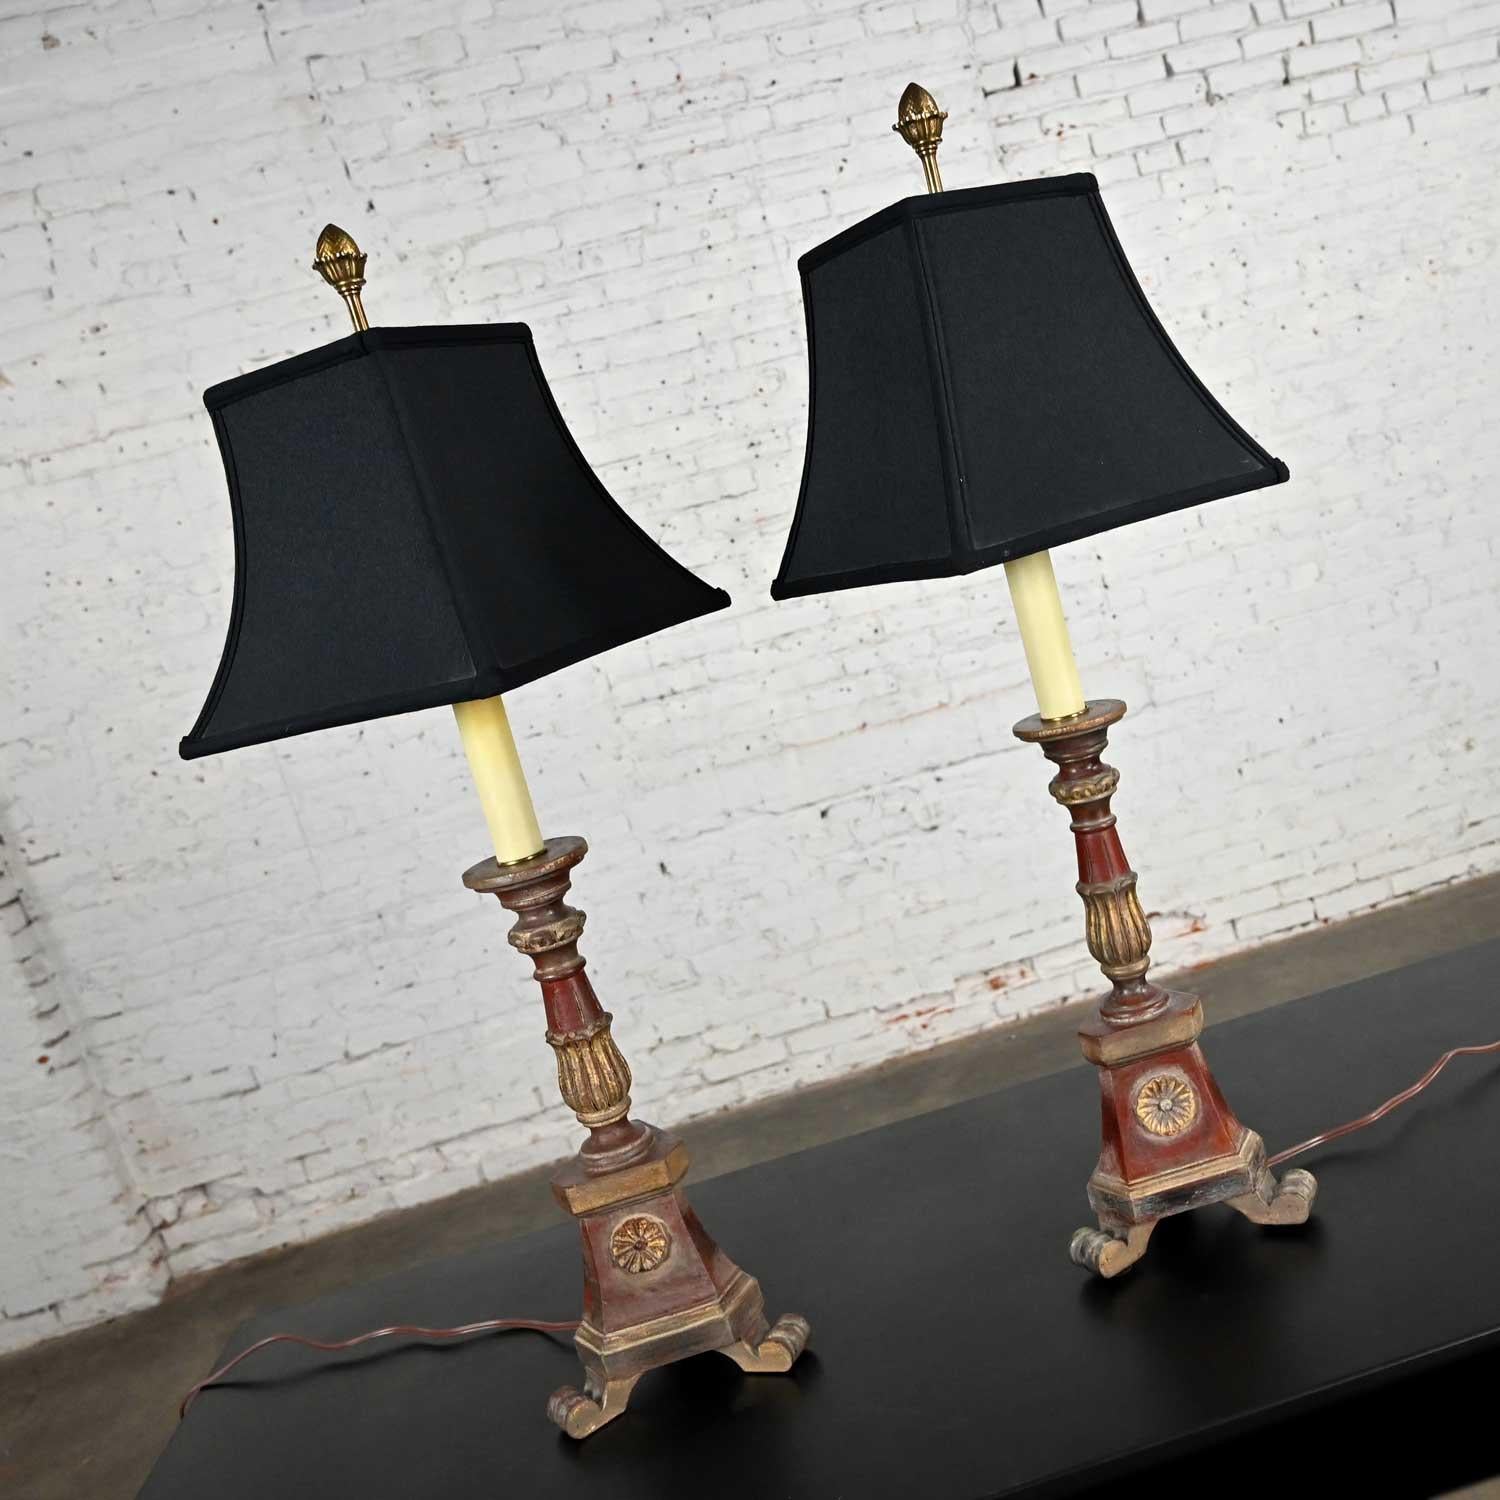 Wonderful pair of vintage Regency style pair of candlestick lamps comprised of carved wood bases with aged painted and gilded finish, linen-like gold lined squared bell-shaped shades, and a knob switch by Chapman. Beautiful condition, keeping in